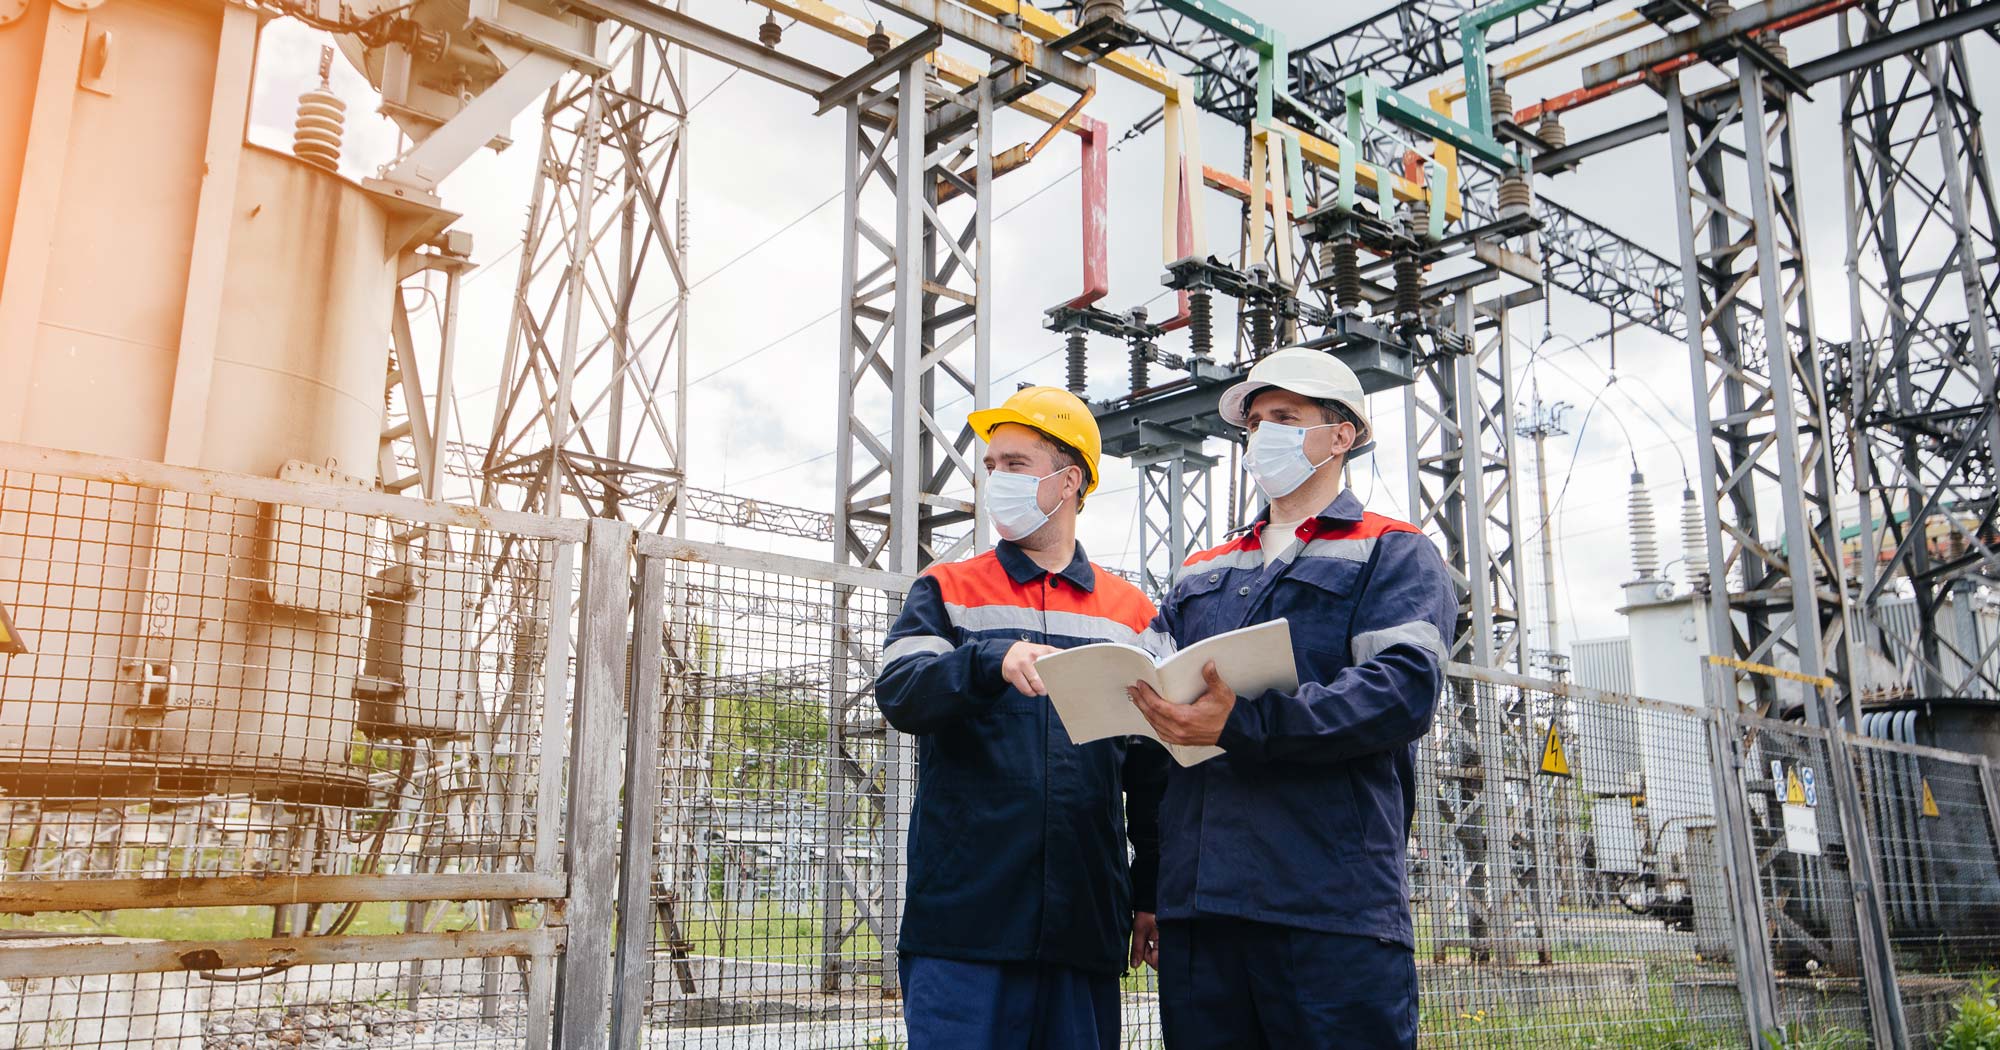 Engineers in electrical substation conducts a survey of modern high-voltage equipment